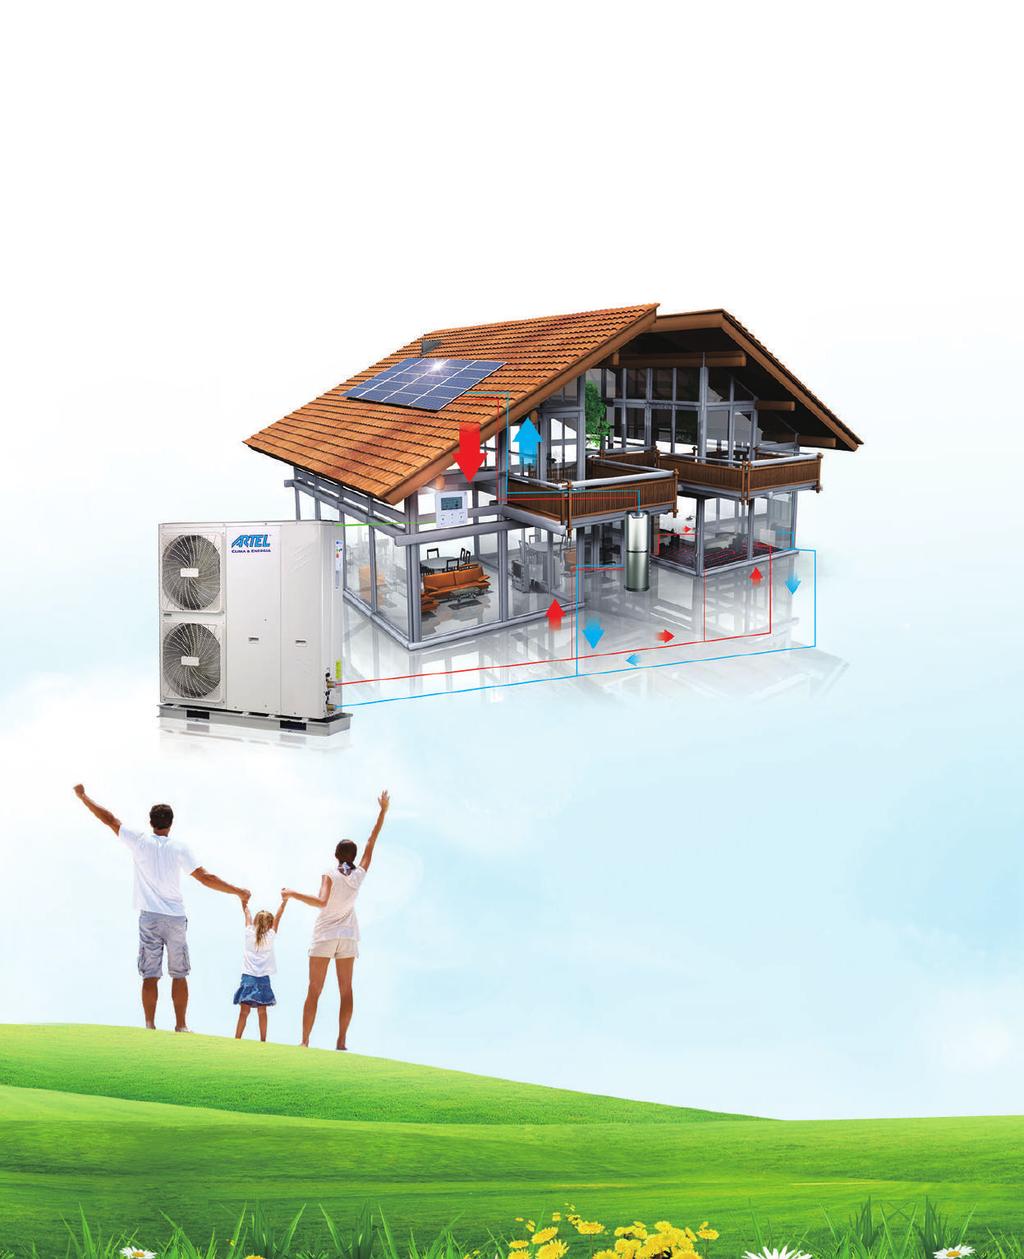 Introduction Introduction Total heat solution - H eating, cooling, domestic hot water in one system Thermal is an integrated system that heats and cools space, as well as produces domestic hot water.